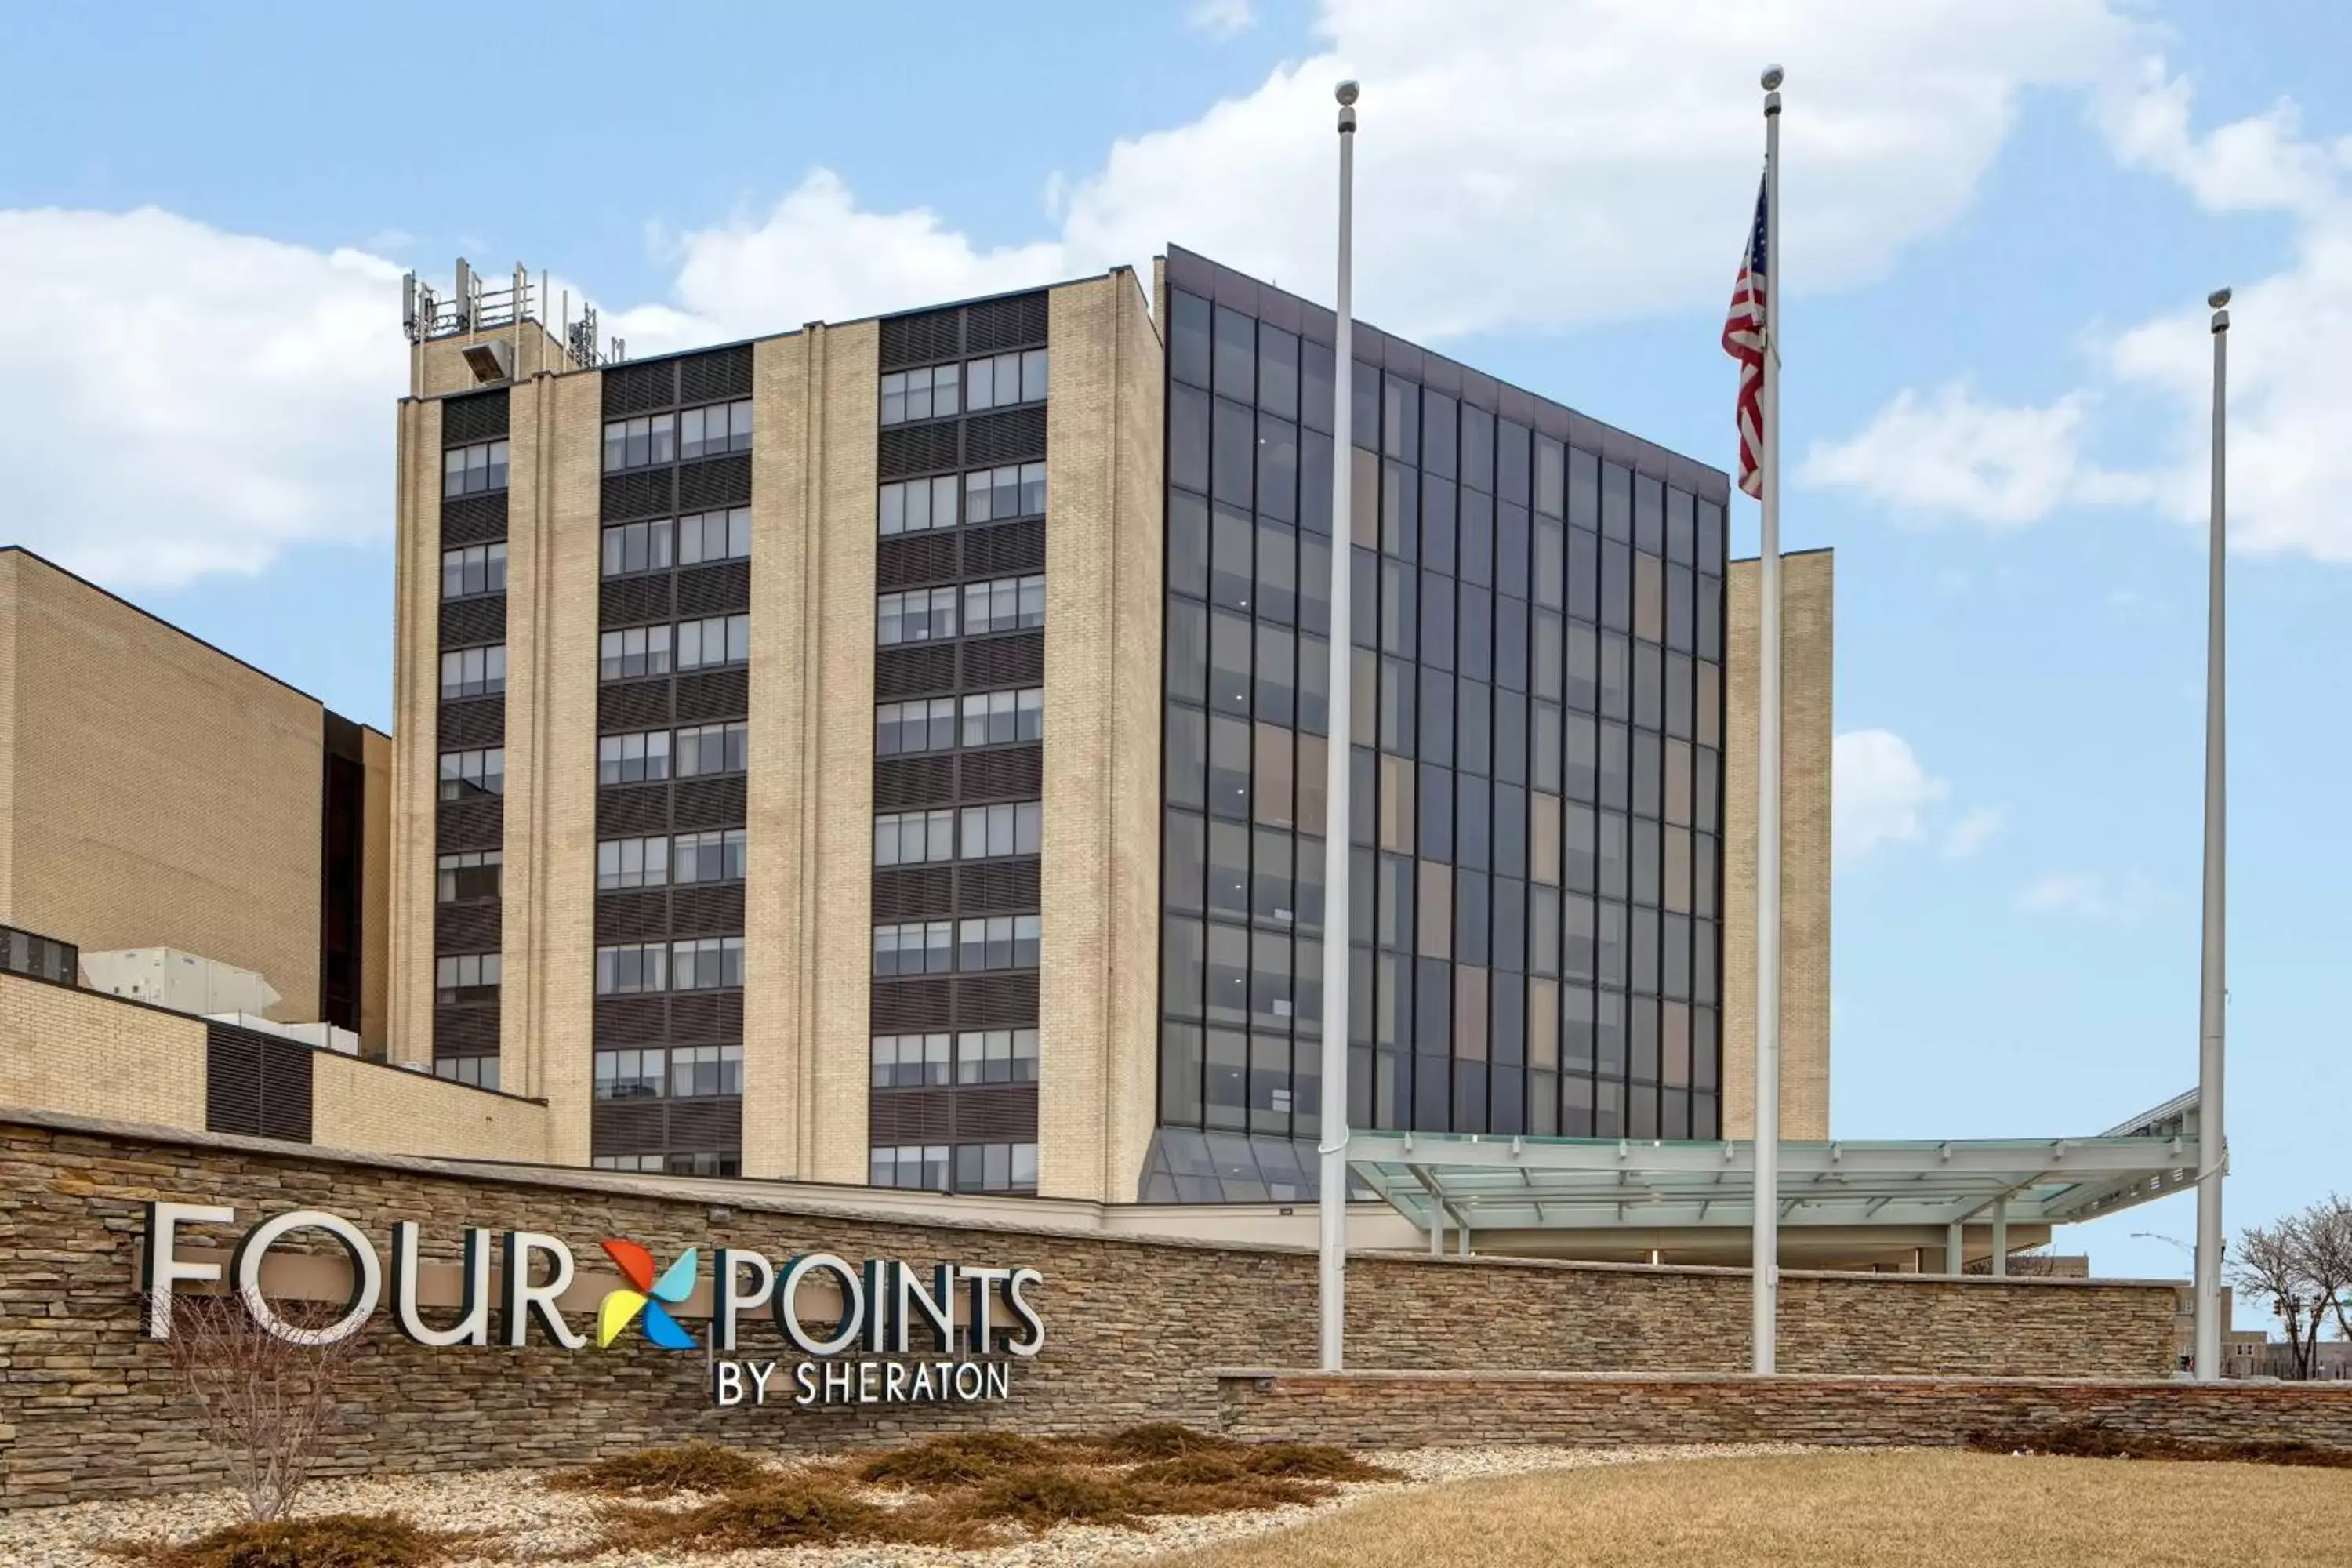 Property Building in Four Points by Sheraton Peoria